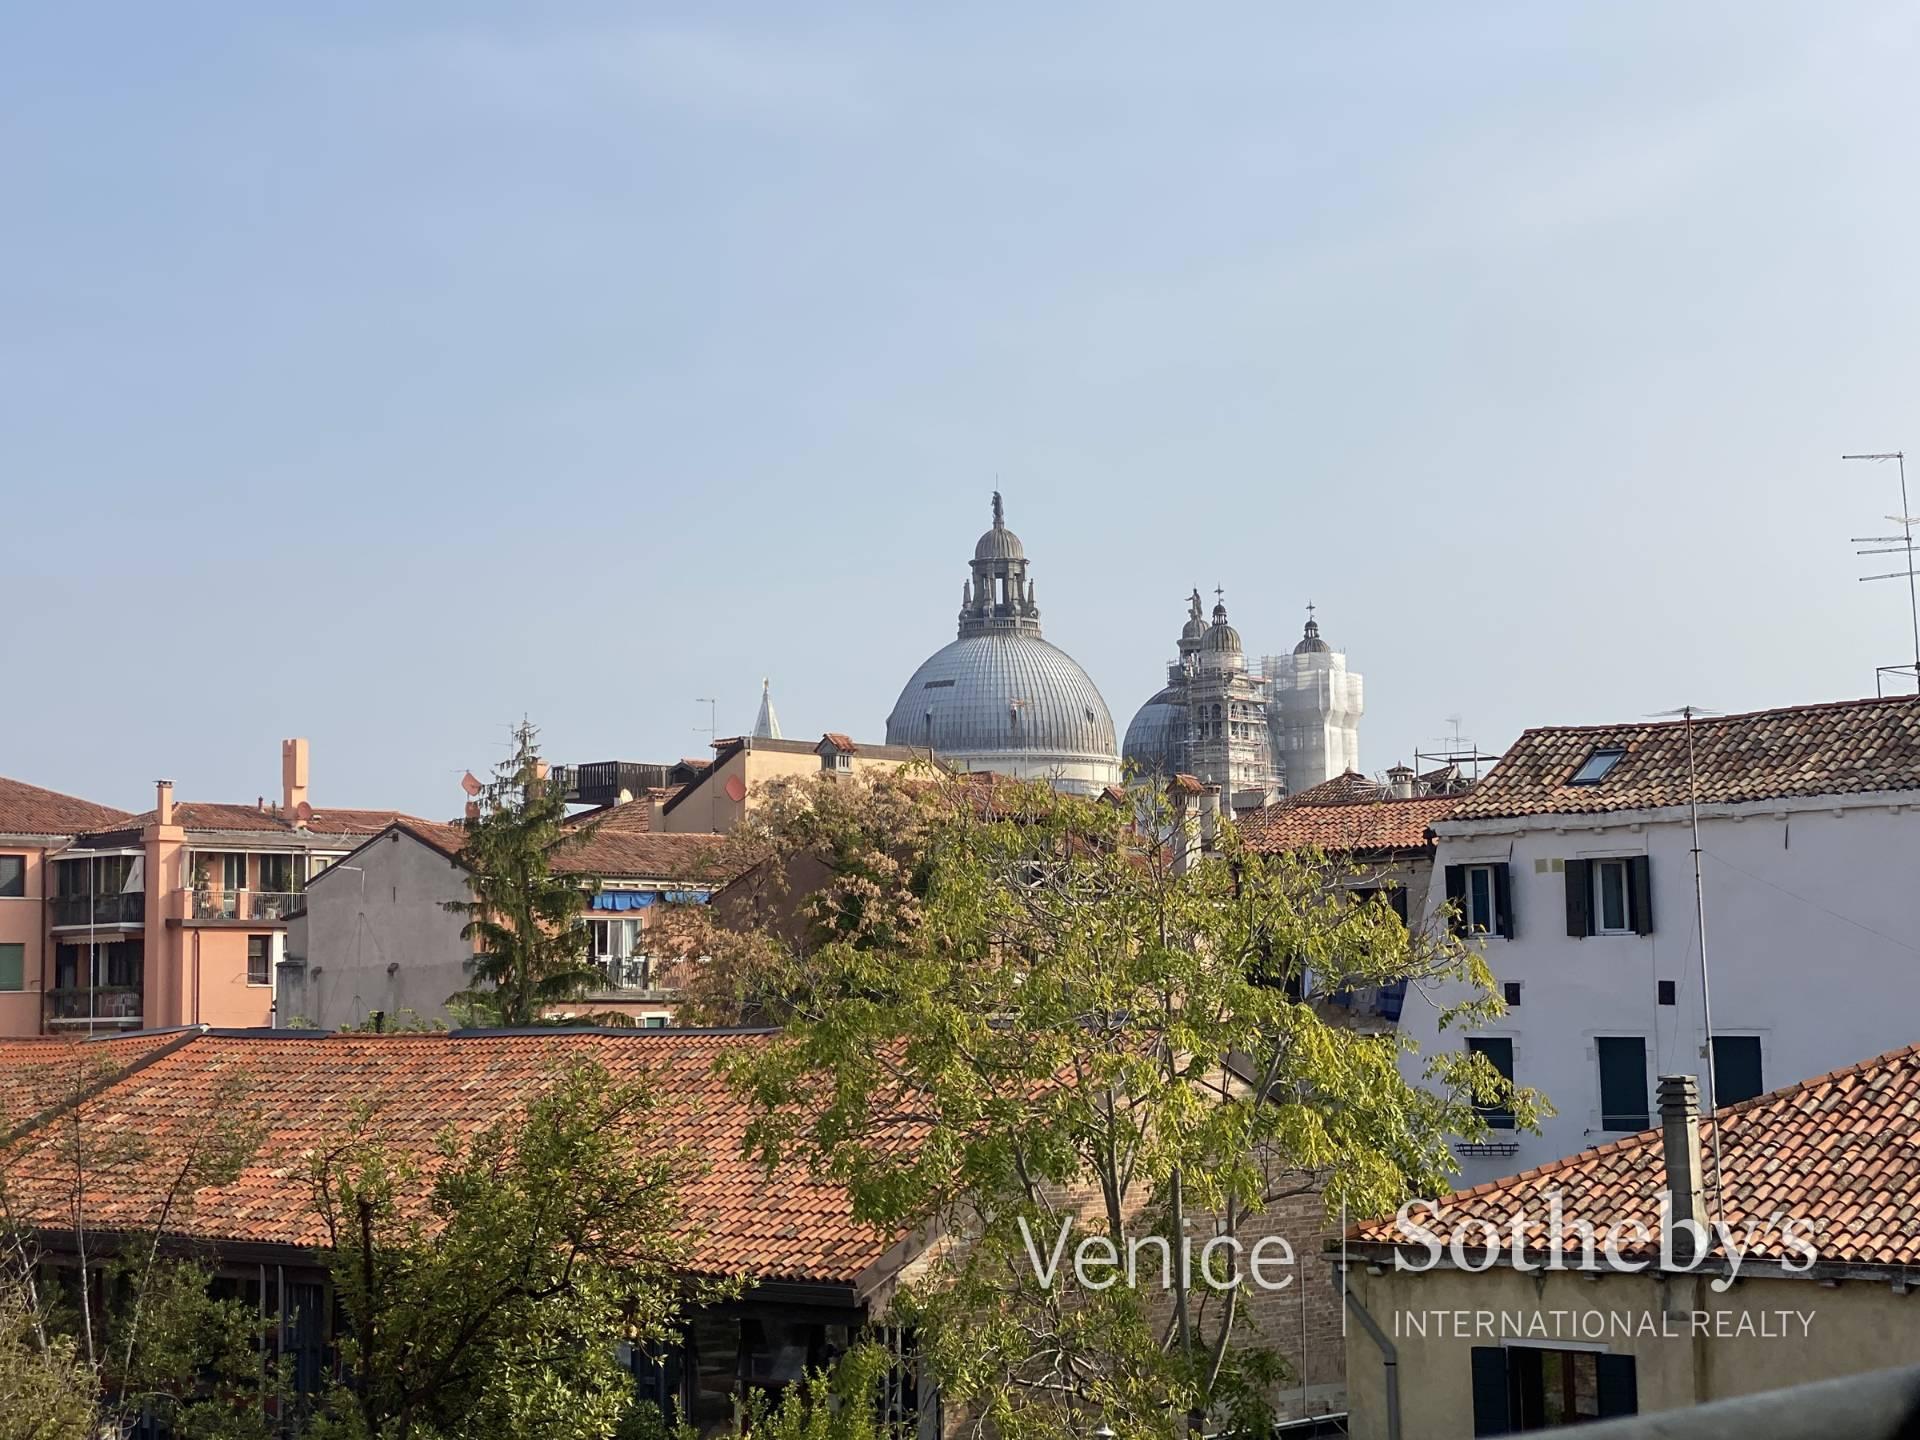 Two very light adjoining properties with airy balconies and mesmerising side views of the Giudecca canal - 8